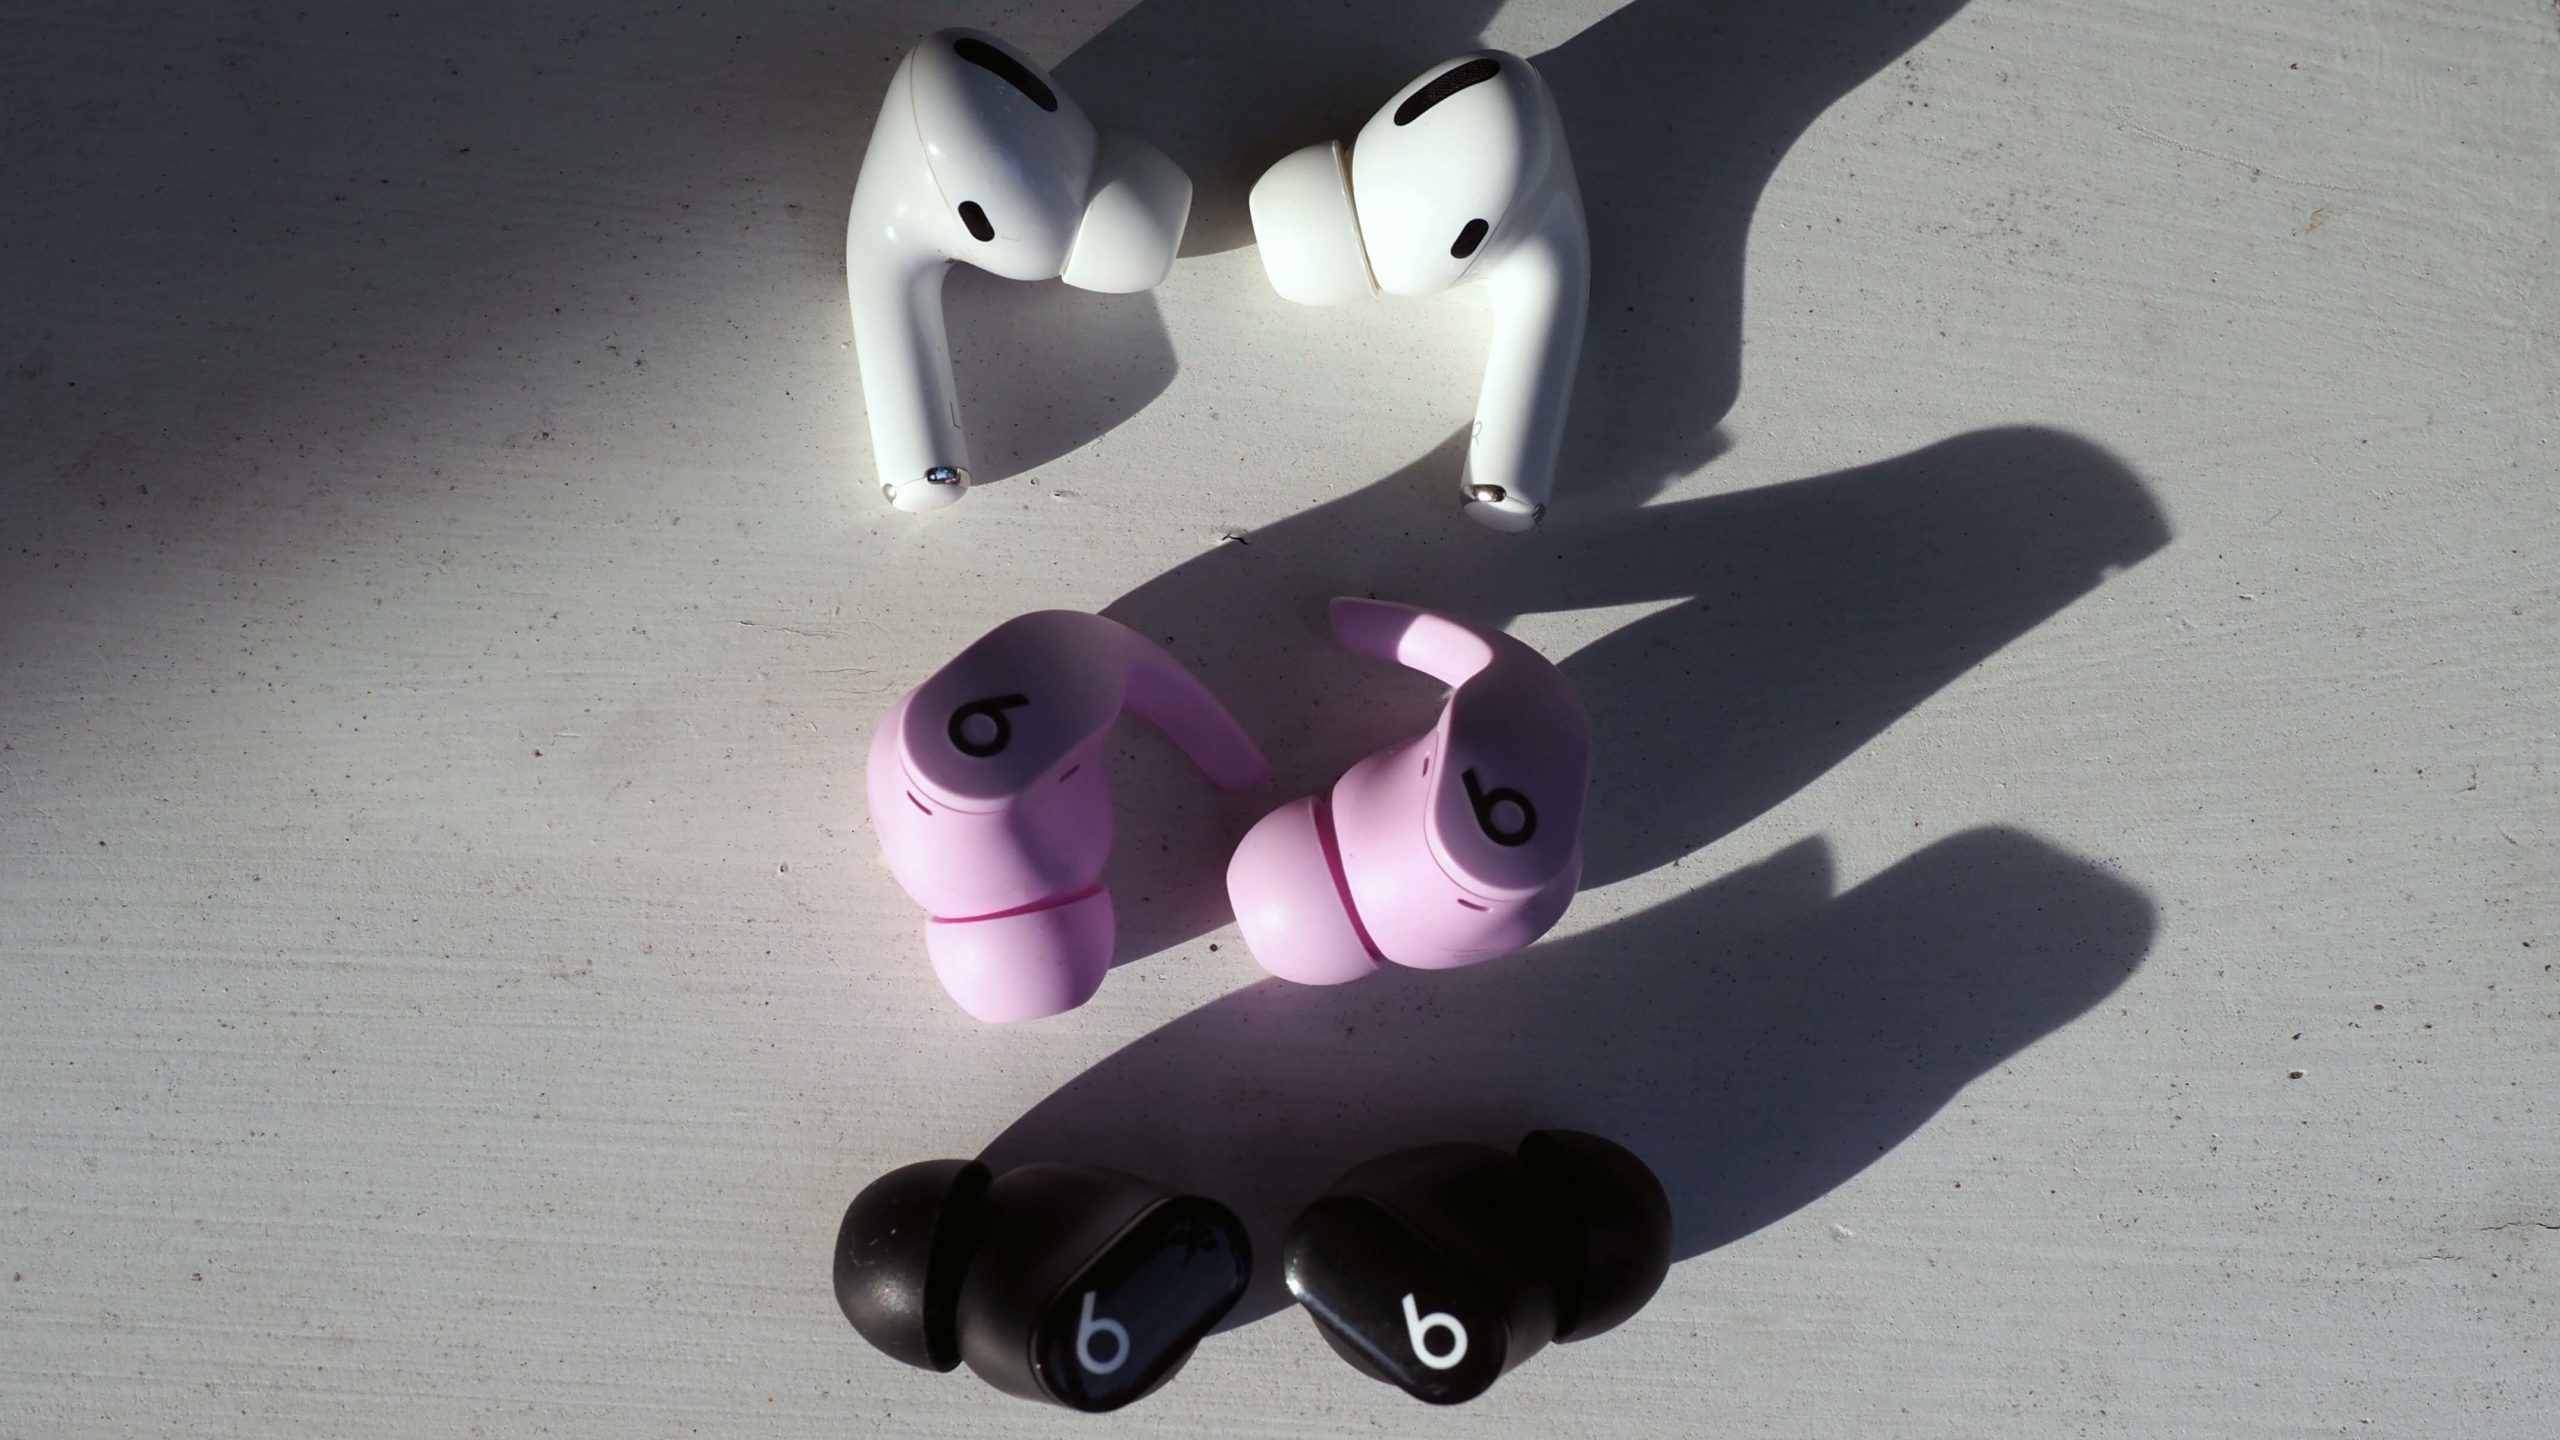 From top to bottom: AirPods Pro, Beats Fit Pro, Beats Studio Buds. (Photo: Caitlin McGarry/Gizmodo)